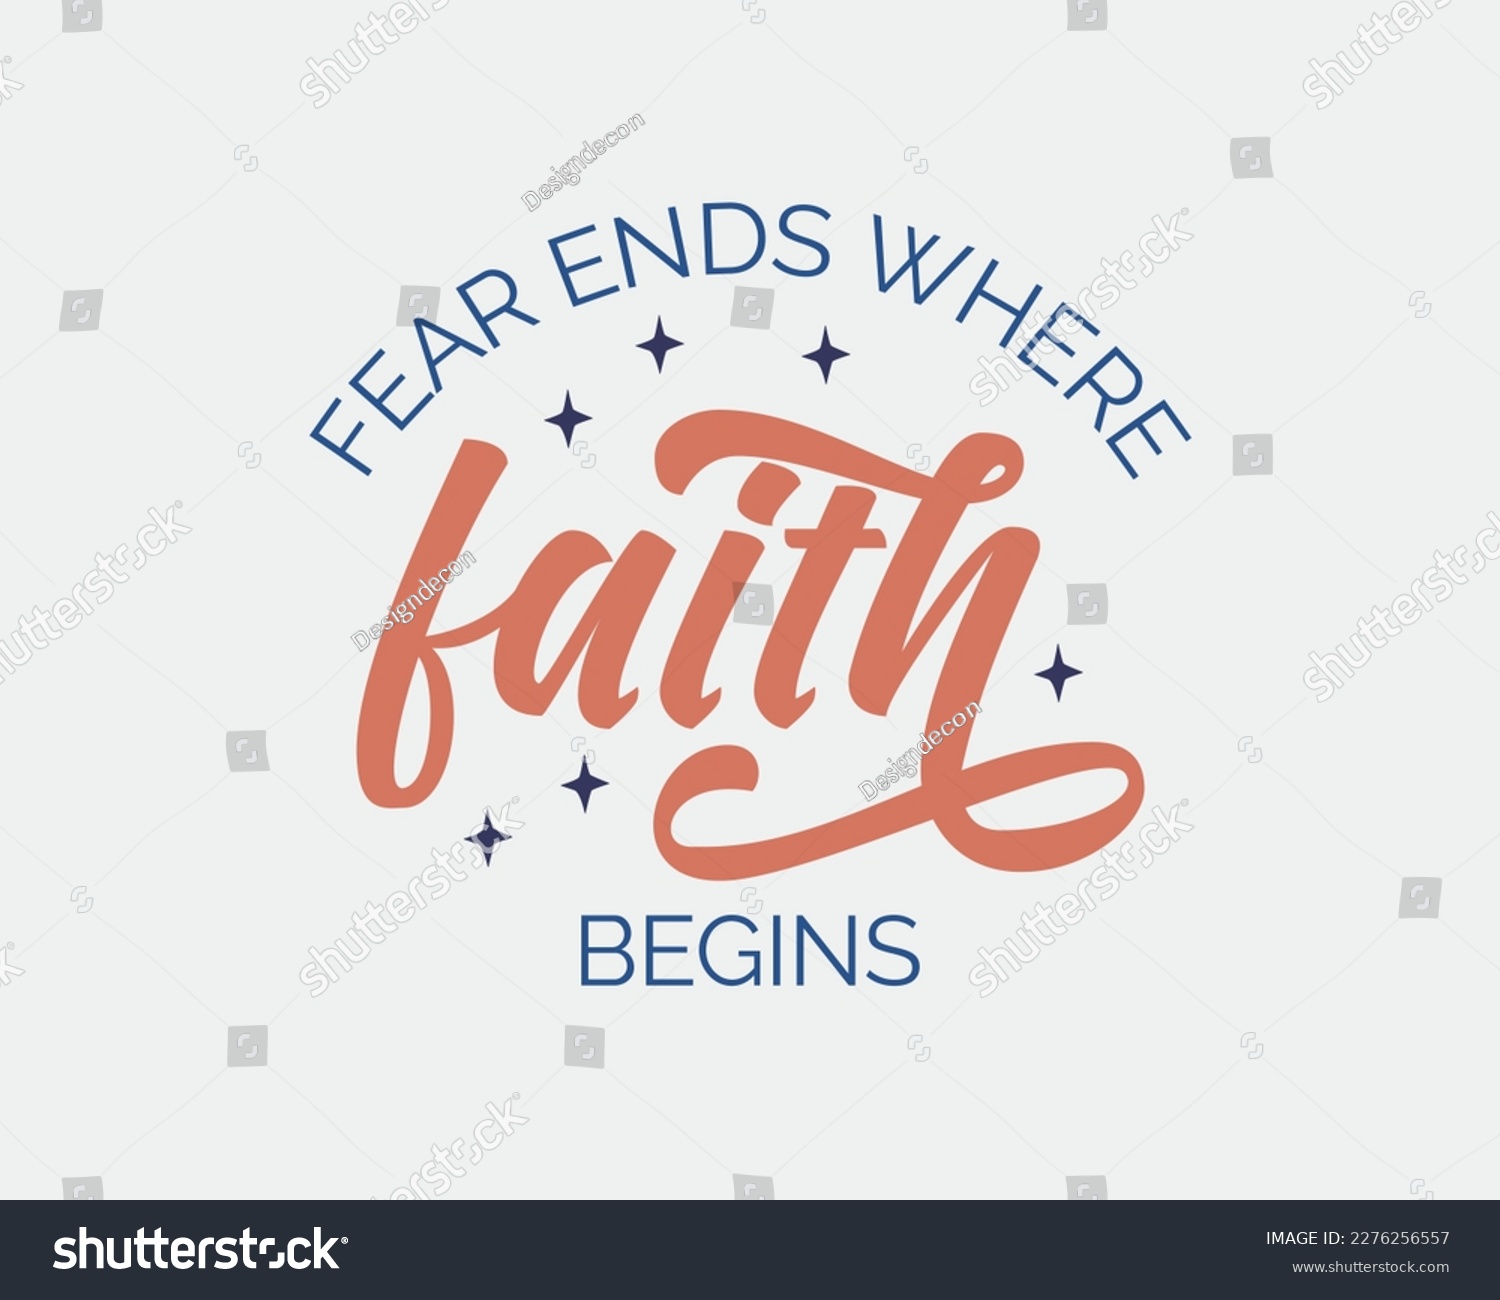 SVG of Fear ends where faith begins Christian quote retro handwritten typographic art on white background svg